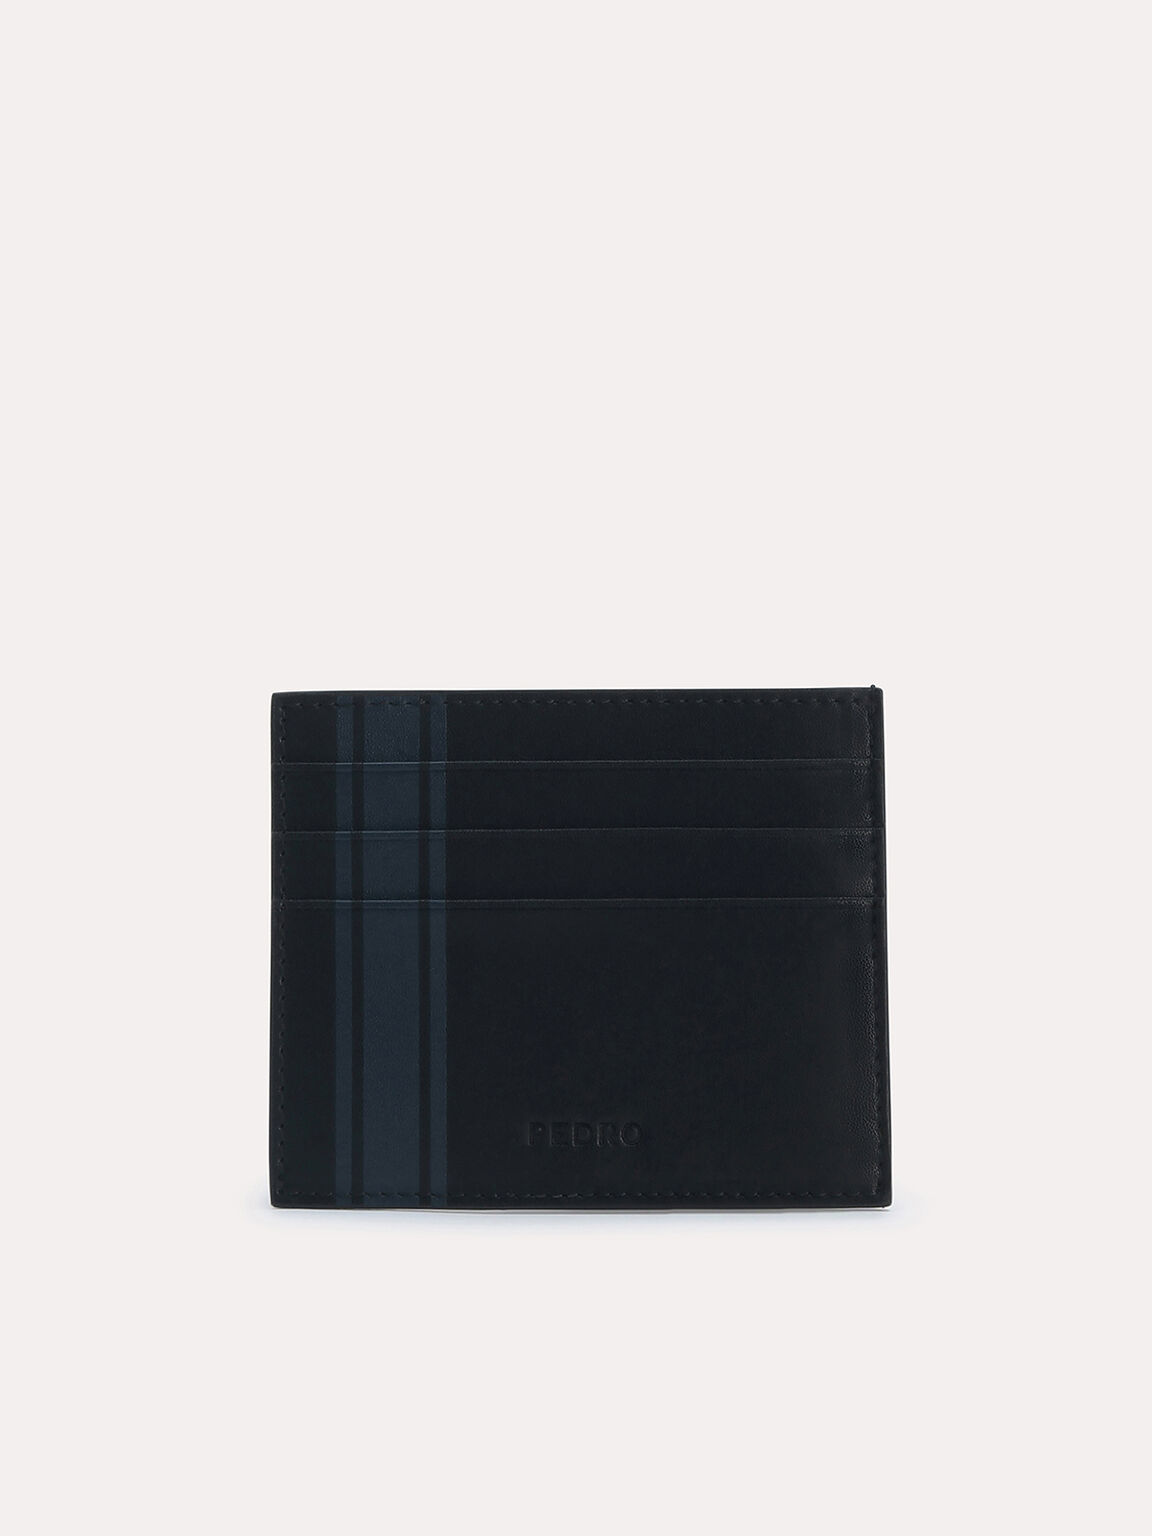 Two-Tone Leather Cardholder, Black